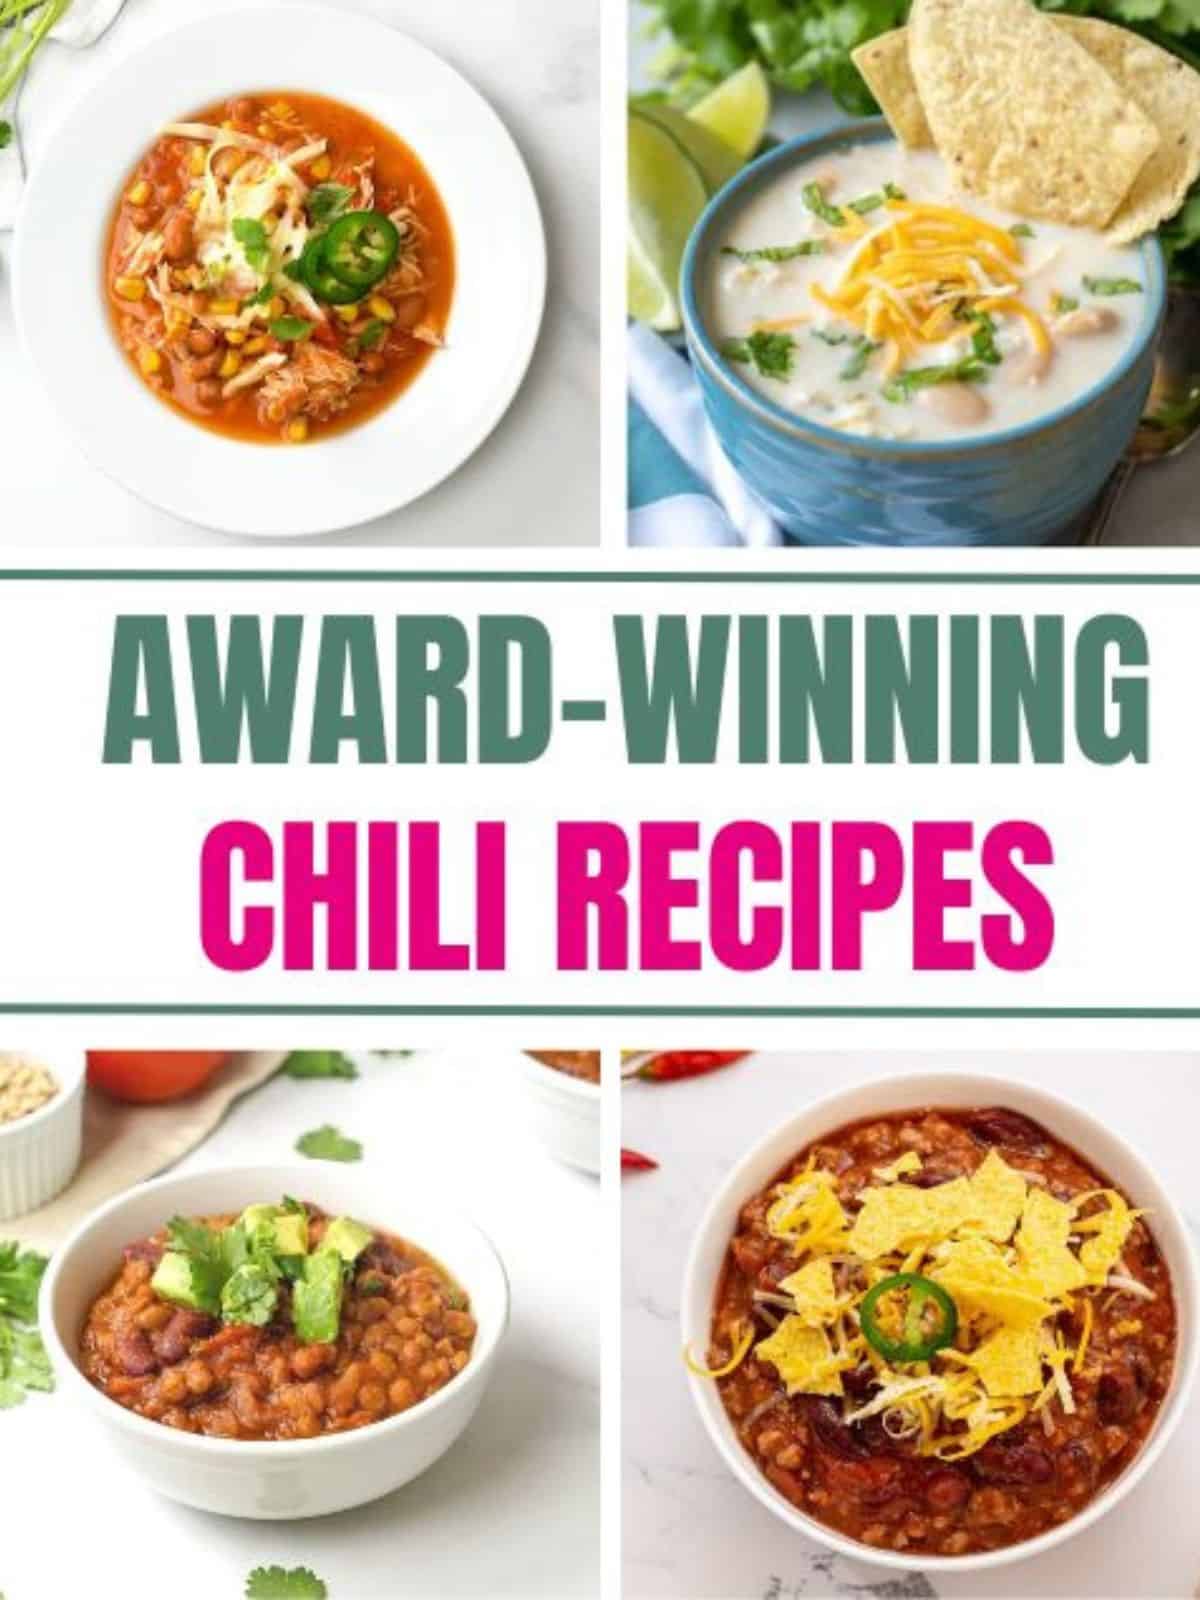 Whether you are in the mood for beef chili, chicken chili, or a hearty vegetarian chili, these are tried-and-true chili recipes that will leave you satisfied and may even bring home a blue ribbon or two! 